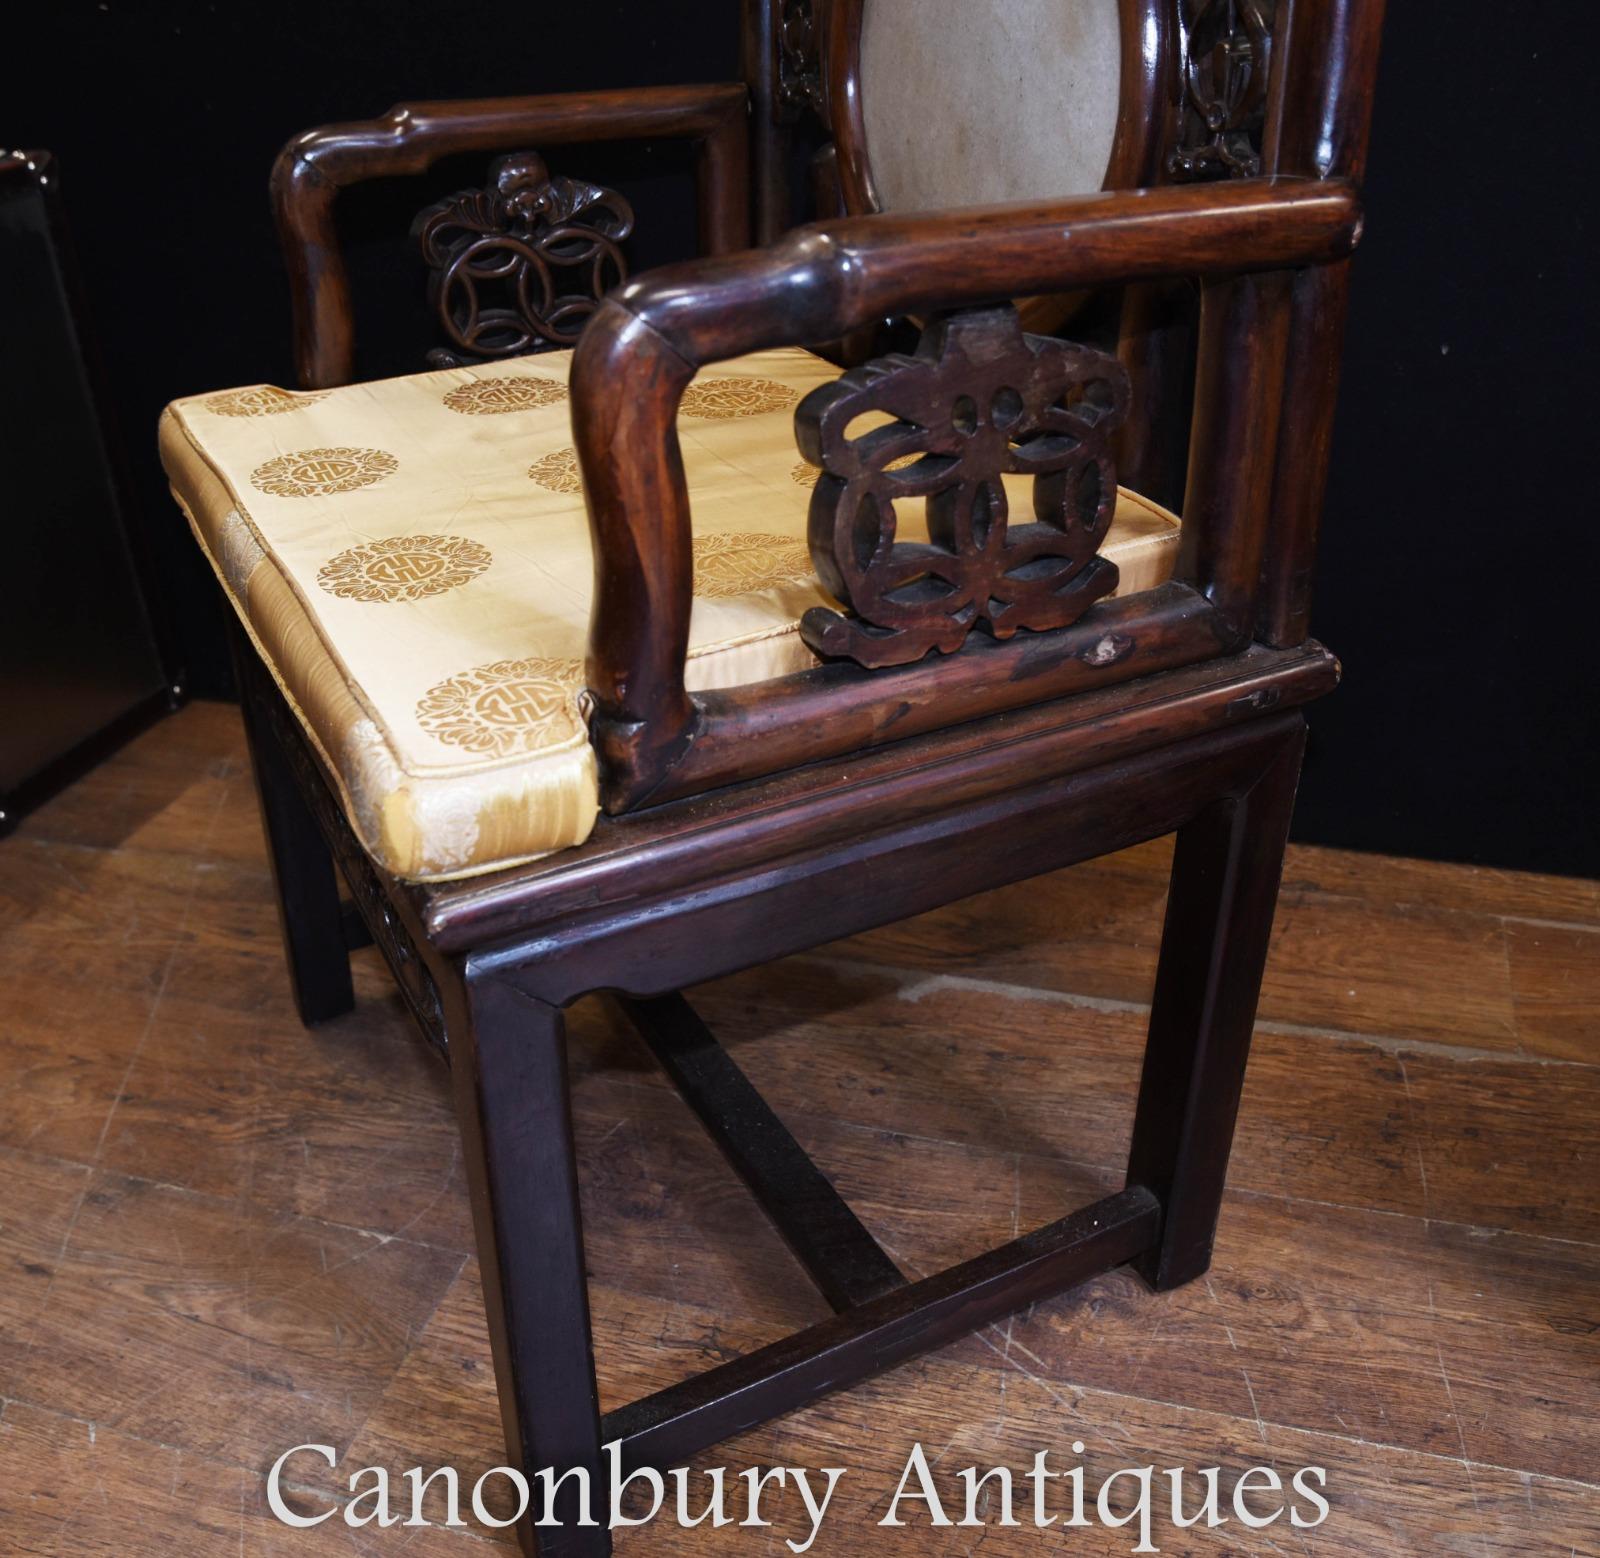 - Elegant pair of antique Chinese antiques in hardwood.
- Feature round marble inserts to the back rest.
- Classic Asian interiors look.
- Very comfortable to sit in on this pair of 19th Century chairs.
- Viewings available by appointment.
-